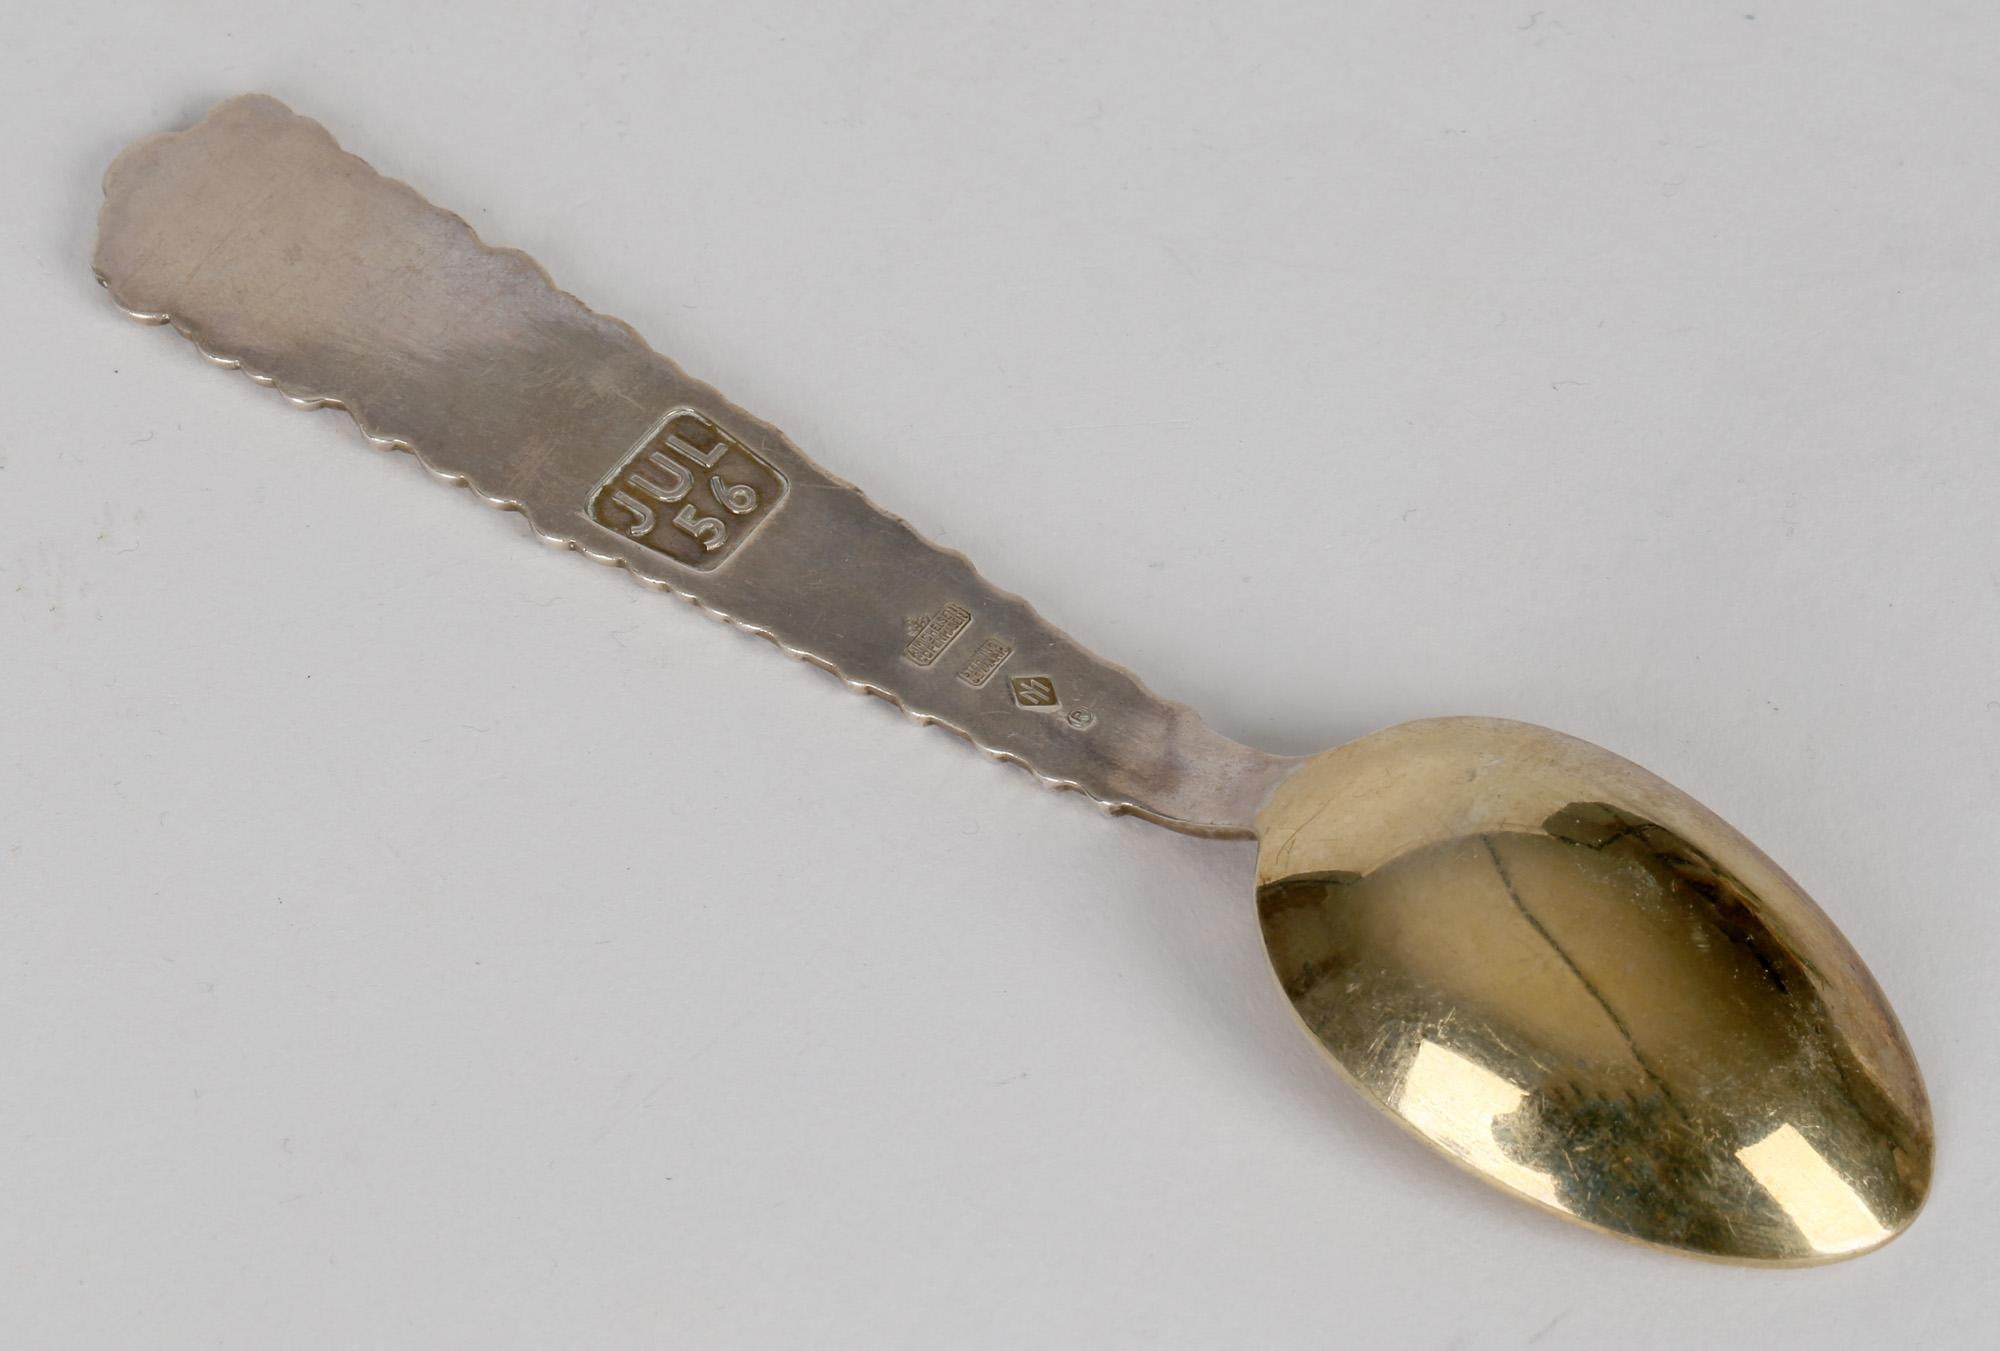 A very fine vintage mid-century Danish gilt silver spoon with inset enamel floral designs by Anton Michelsen and dated JUL 1956. The heavily made spoon has a gilded bowl with silver stem moulded in relief with small flower heads increasing in size